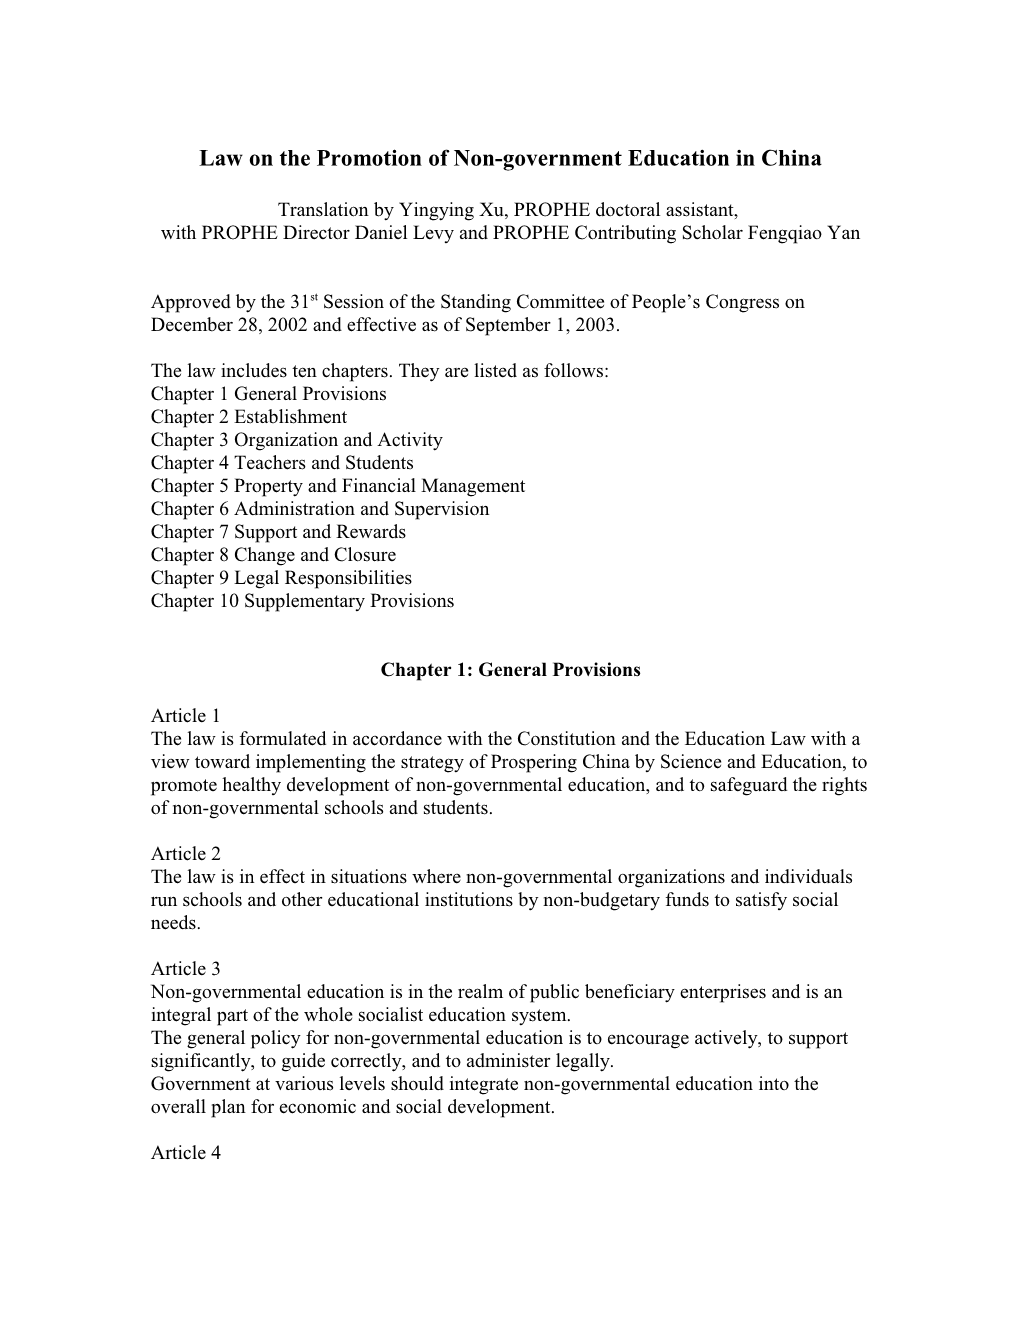 Law On The Promotion Of Non-Government Education In China